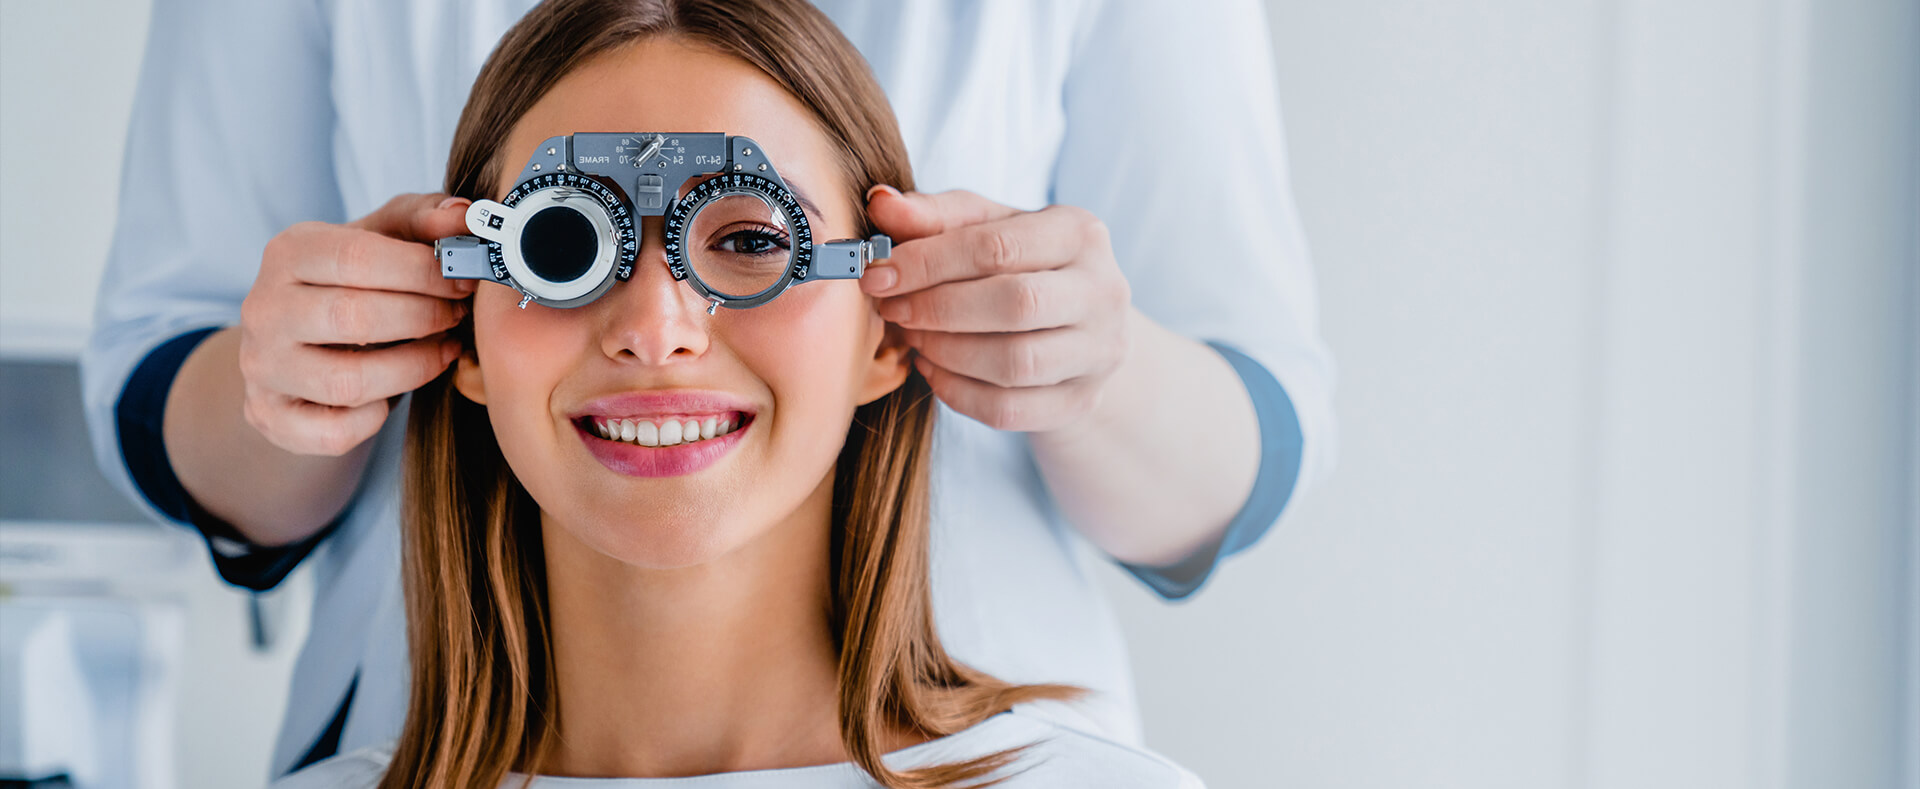 We specializes in serving the Optical, Ophthalmology, Dental, Dermatology, ...